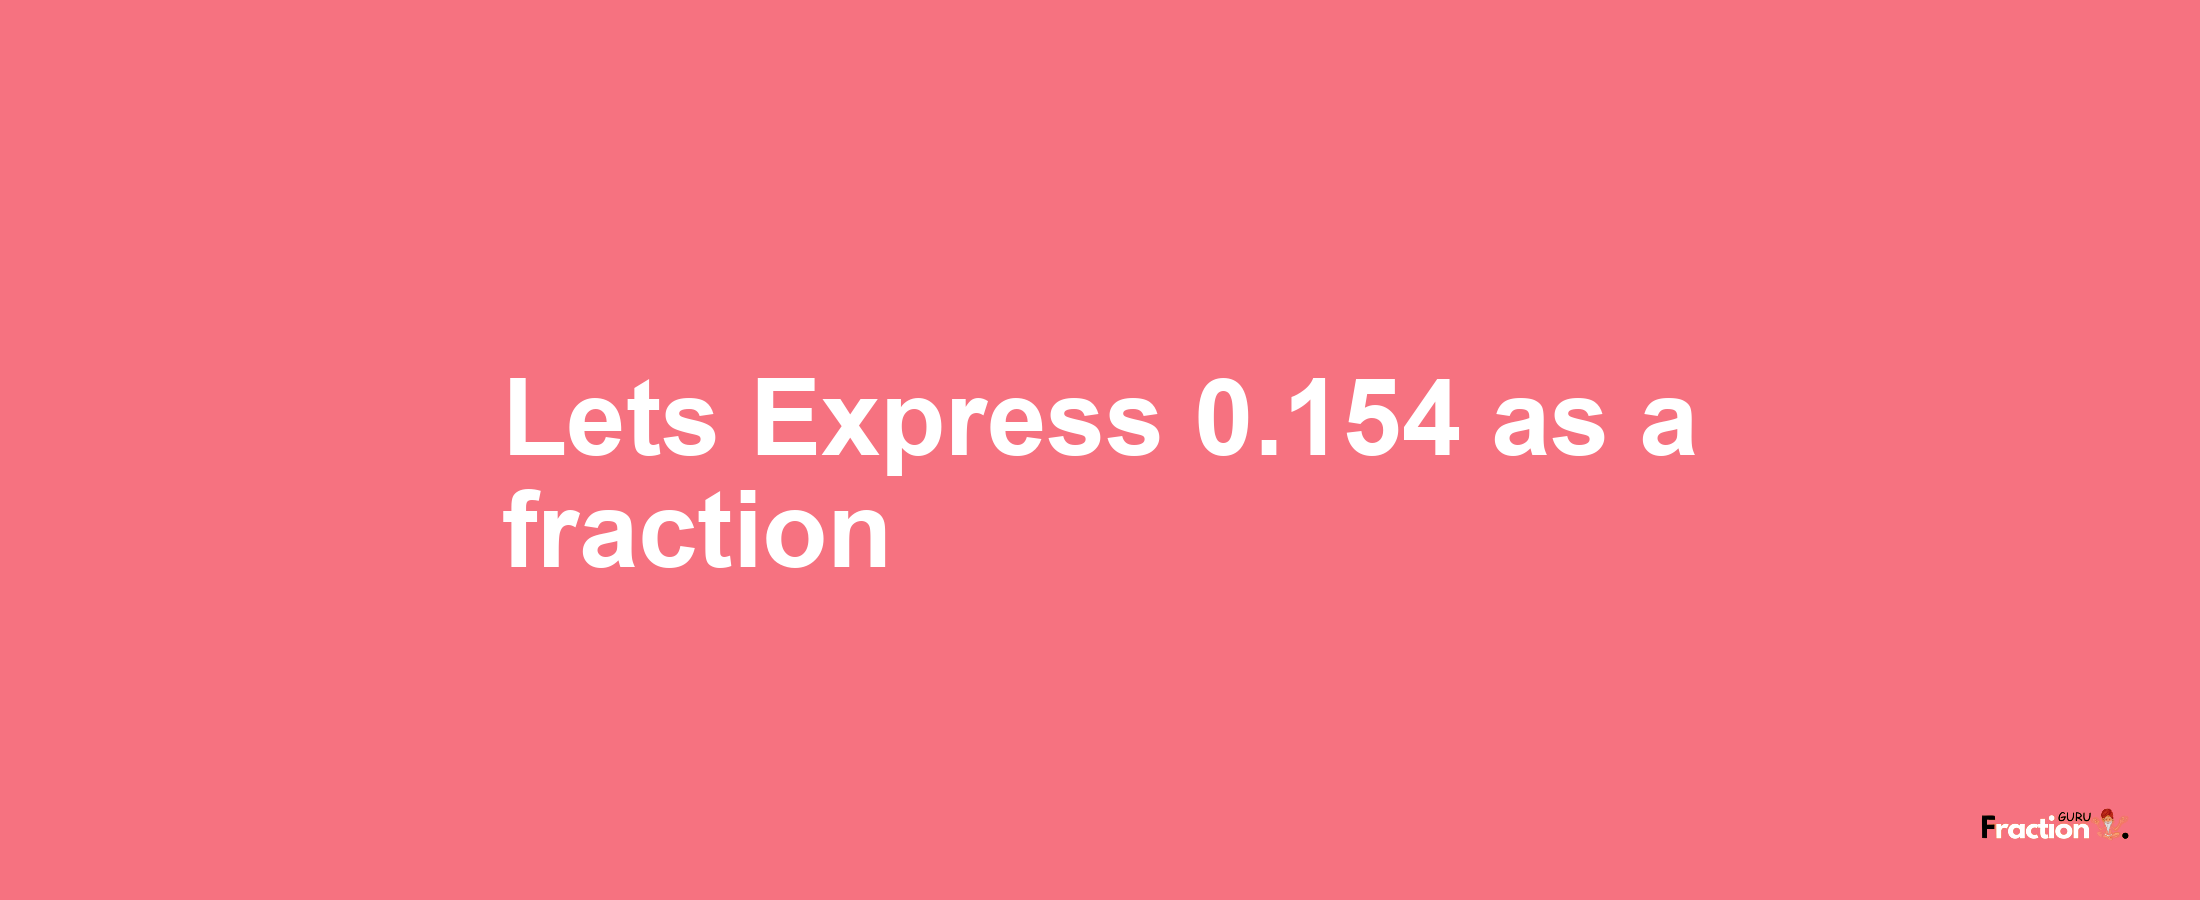 Lets Express 0.154 as afraction